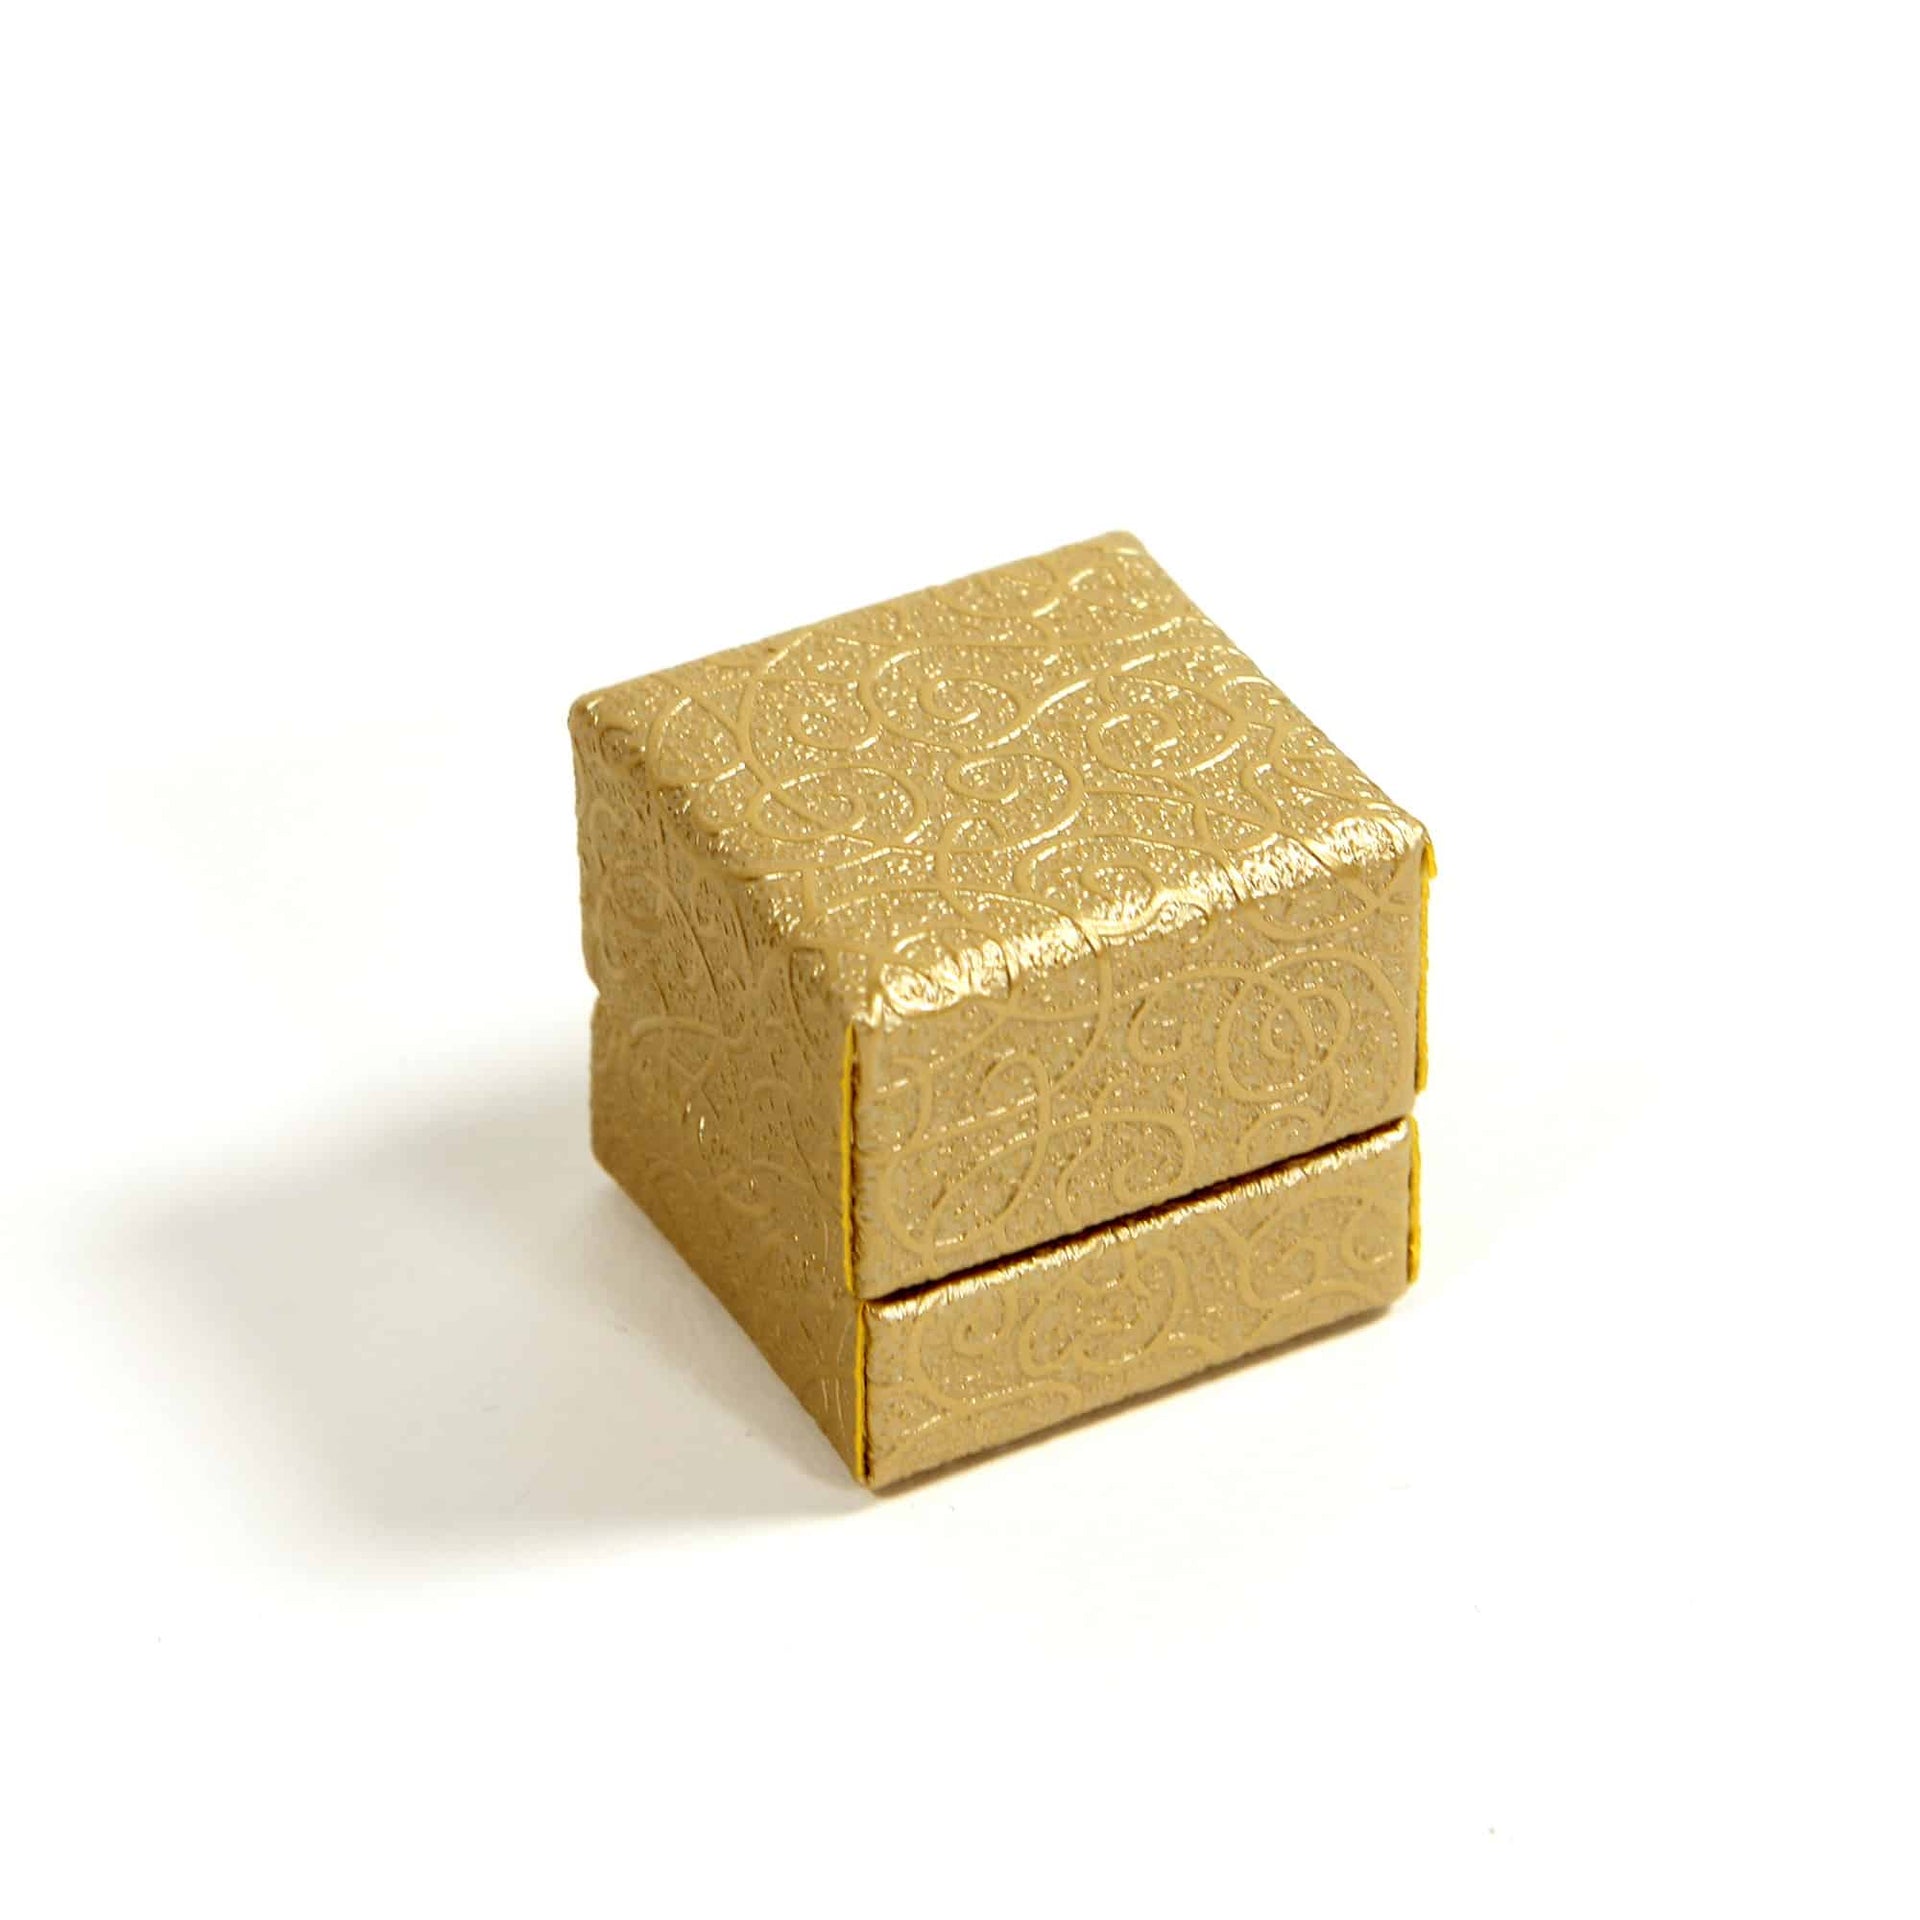 gold luxury ring box for engagements , proposals , wedding. Great gift for any special occasion 